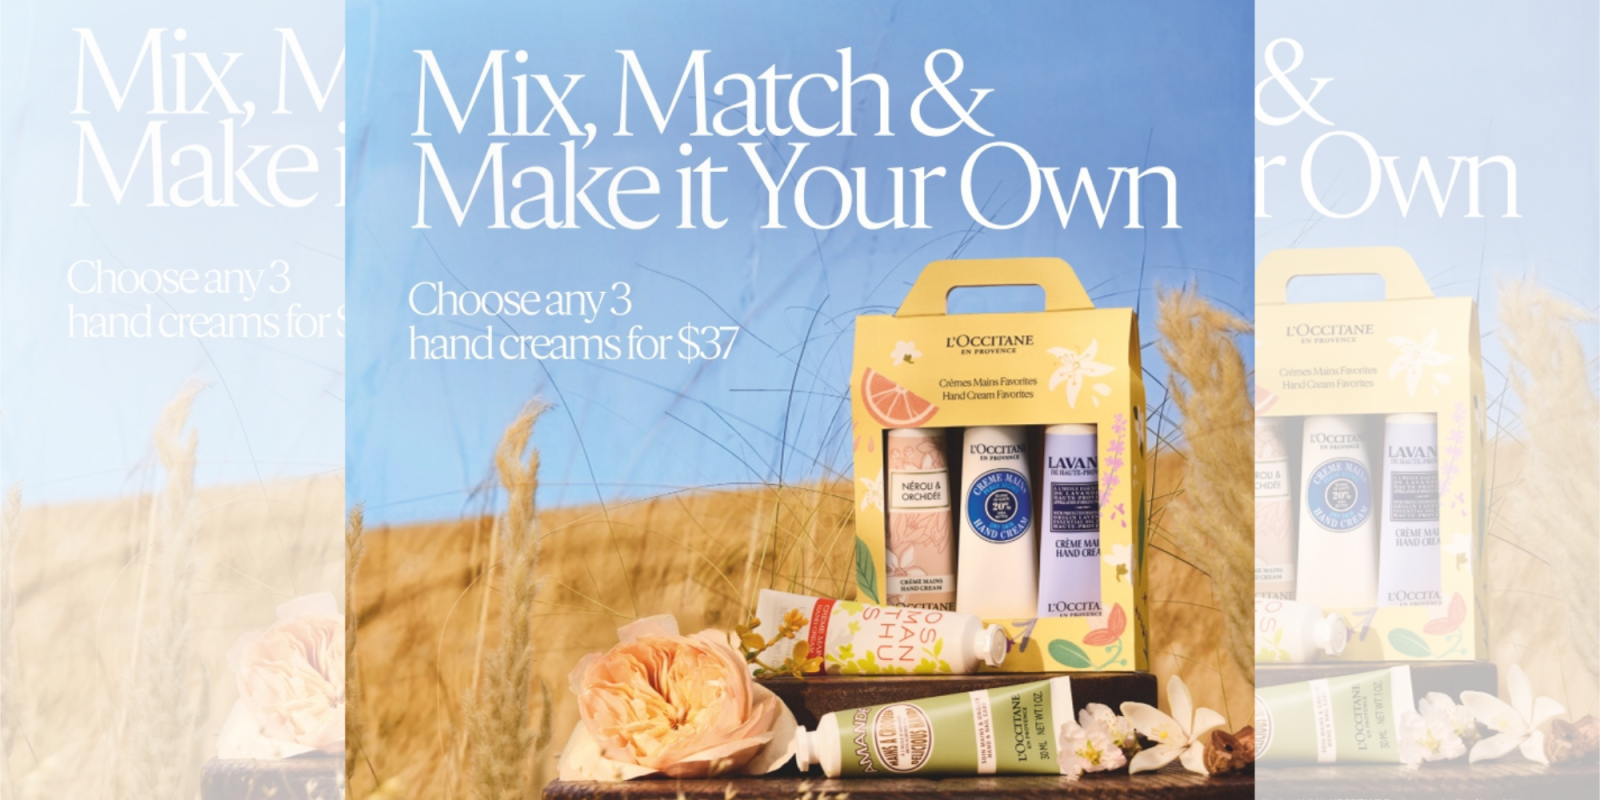 Choose any 3 hand creams for $37